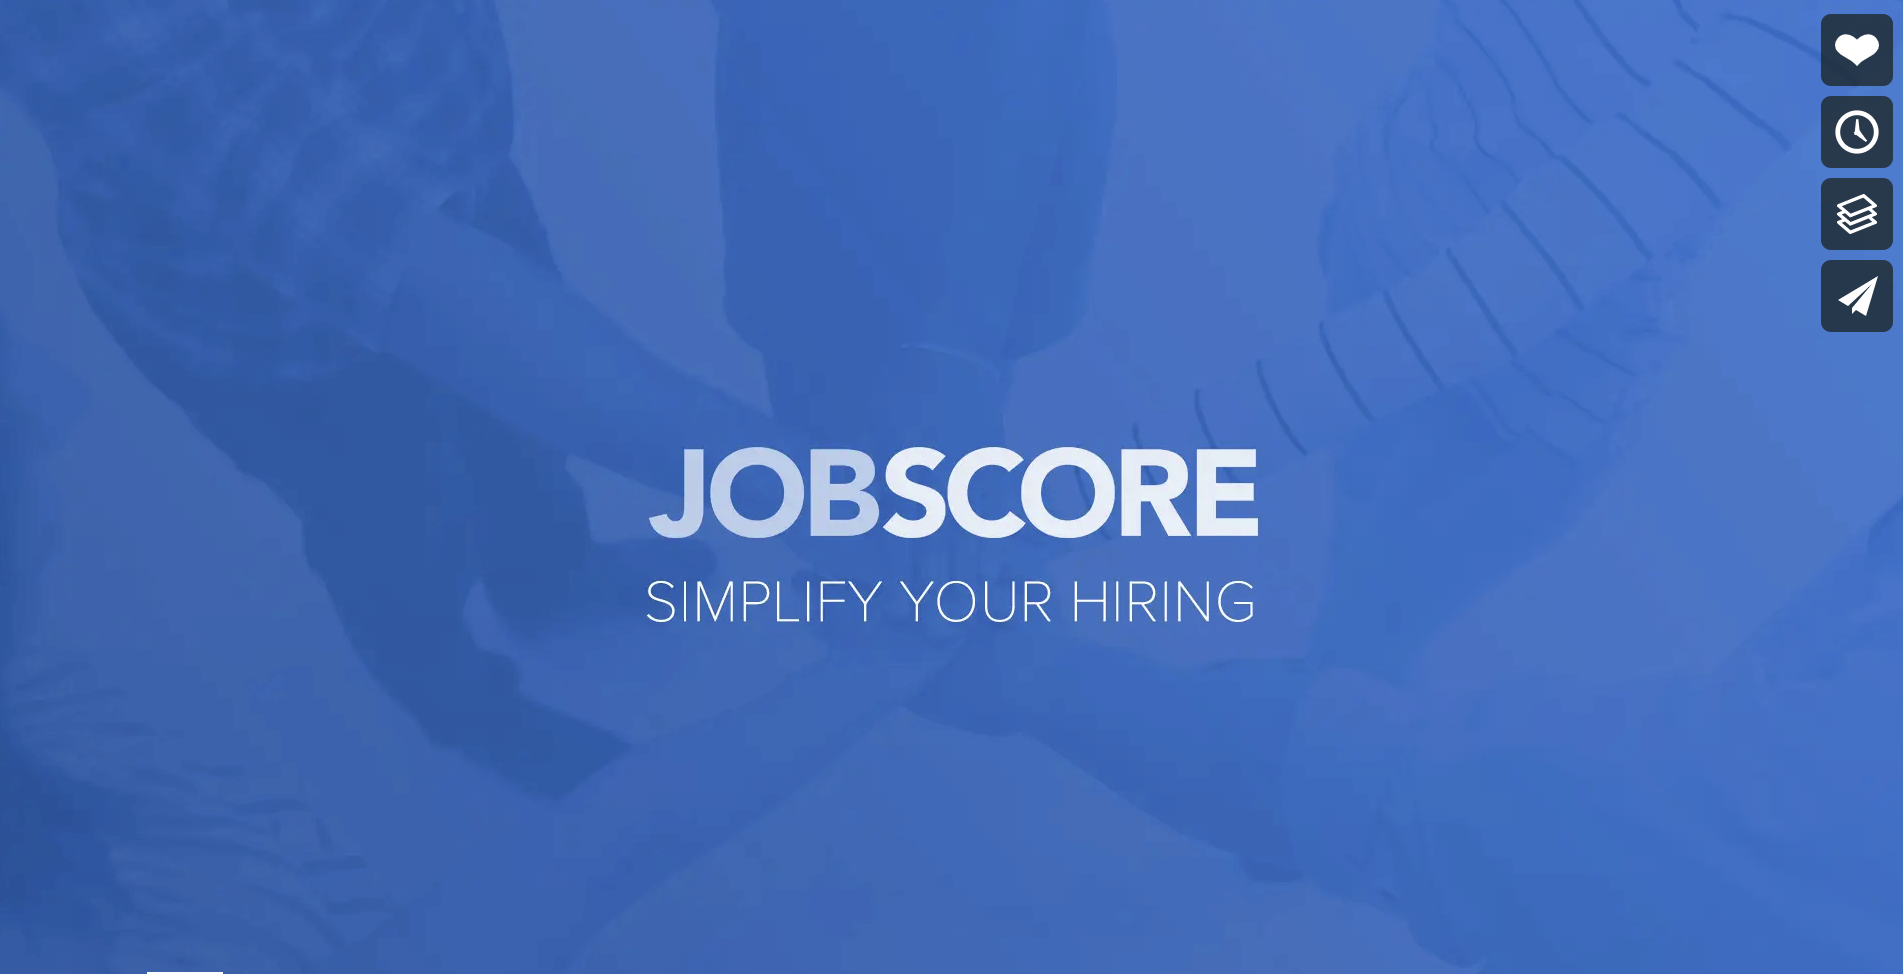 Video overview of JobScore Applicant Tracking System.